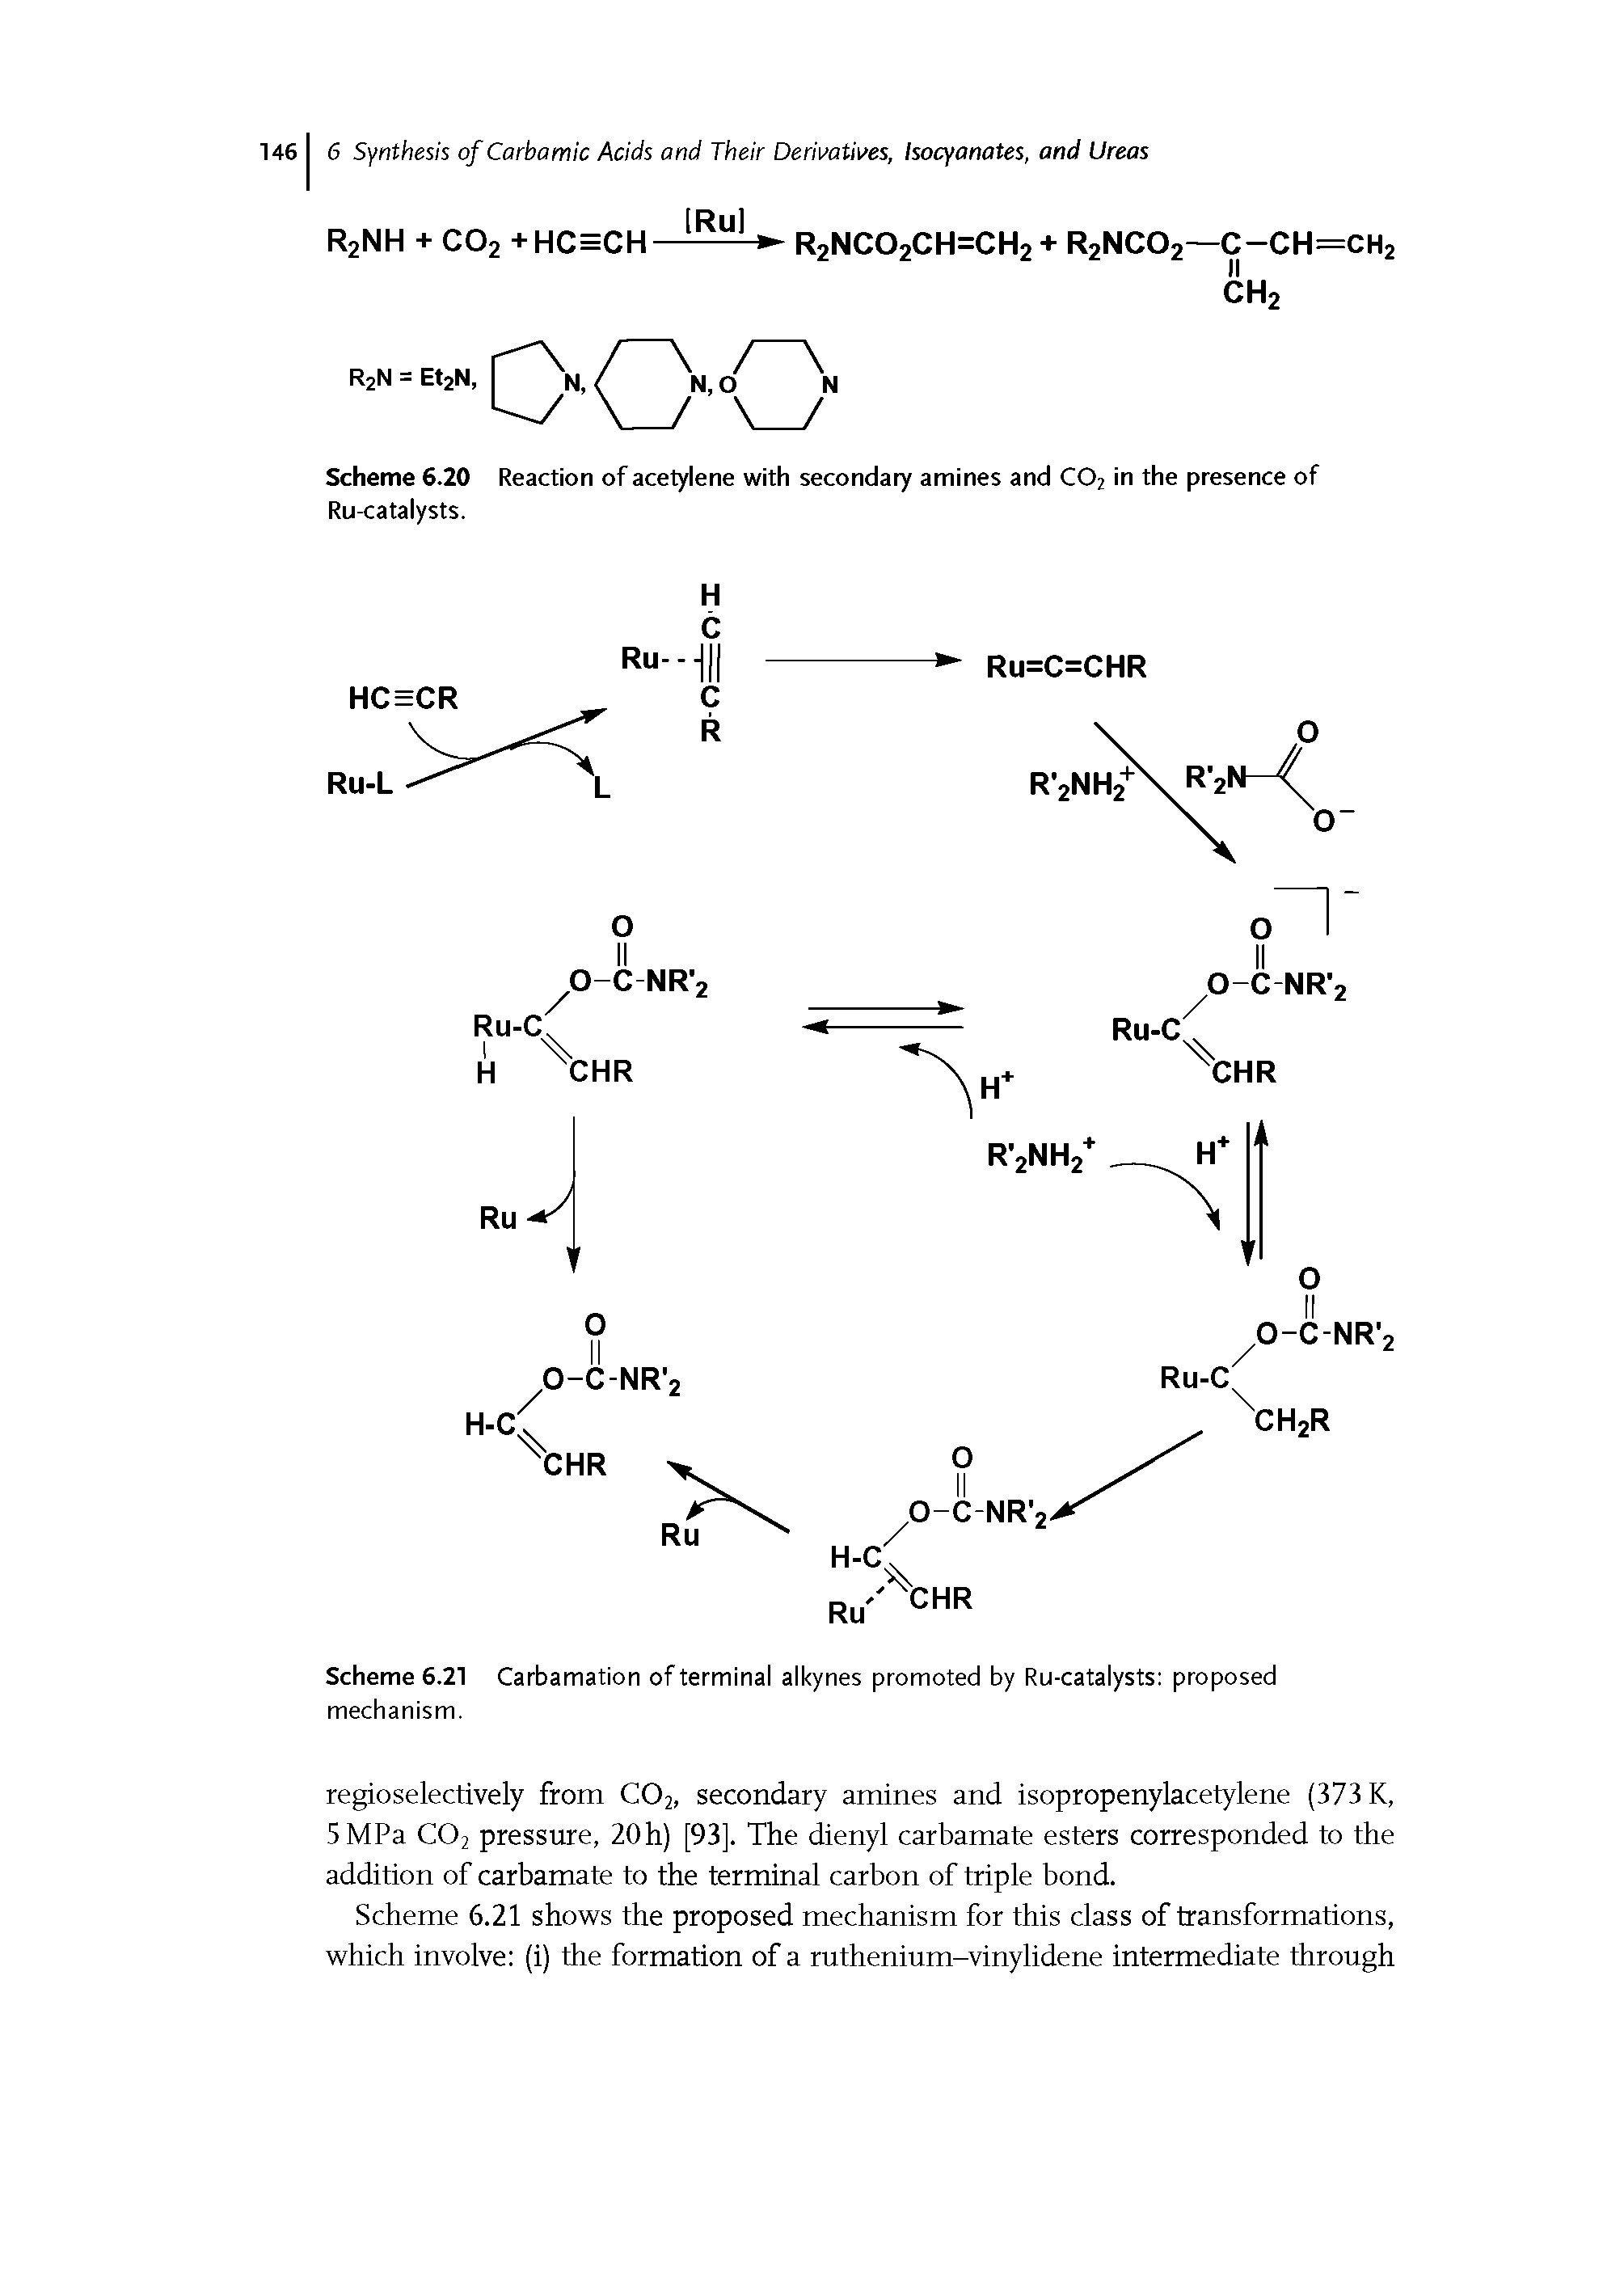 Scheme 6.20 Reaction of acetylene with secondary amines and C02 in the presence of Ru-catalysts.